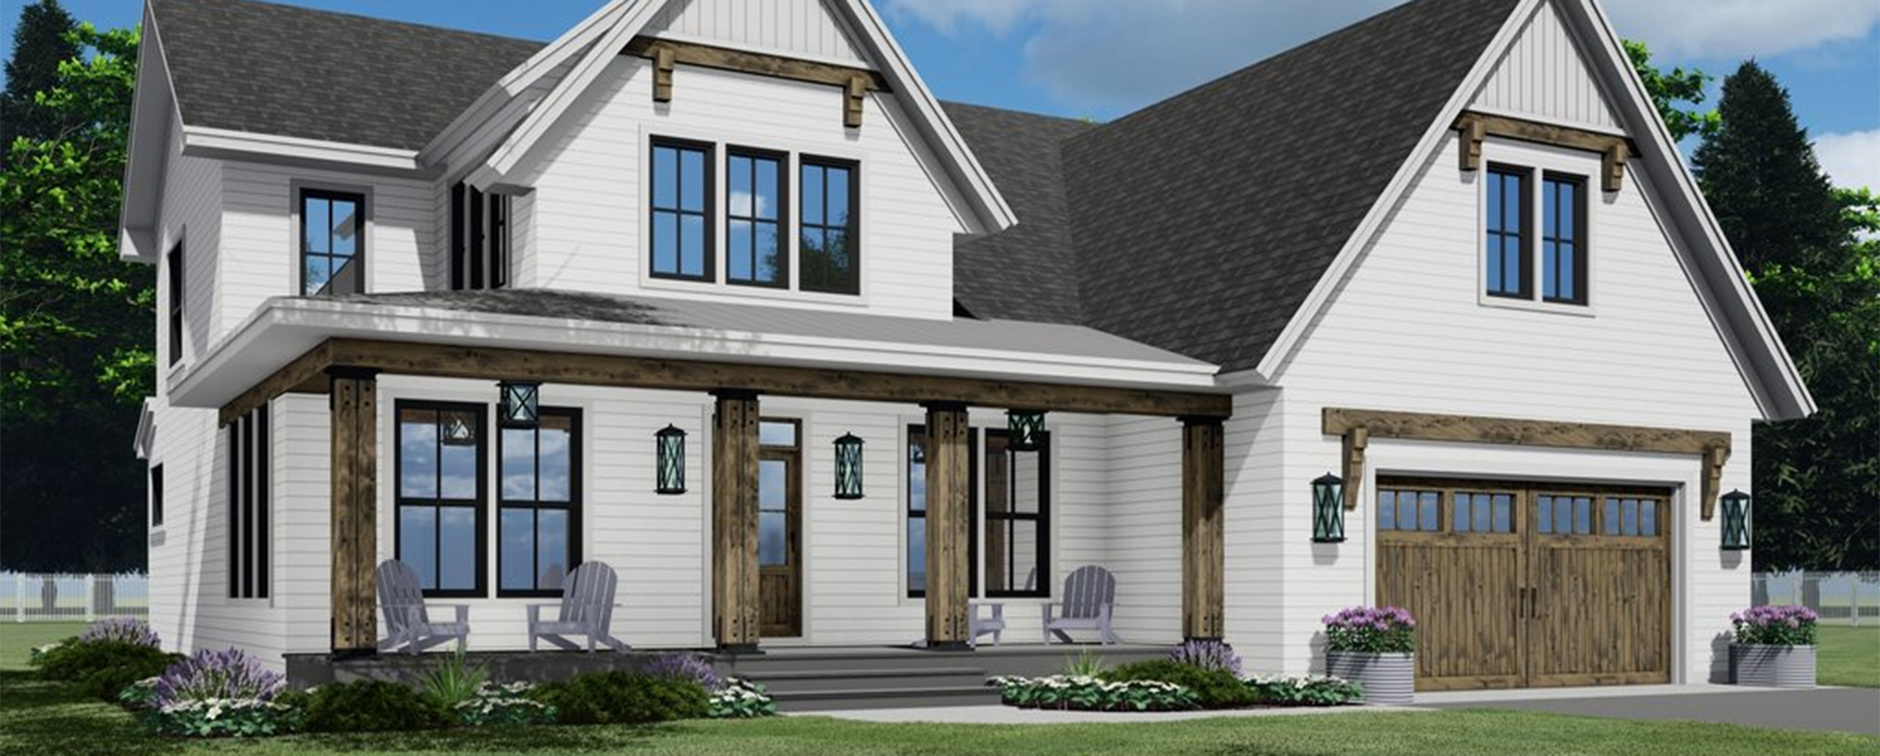 Find the Farmhouse Plan of Your Dreams